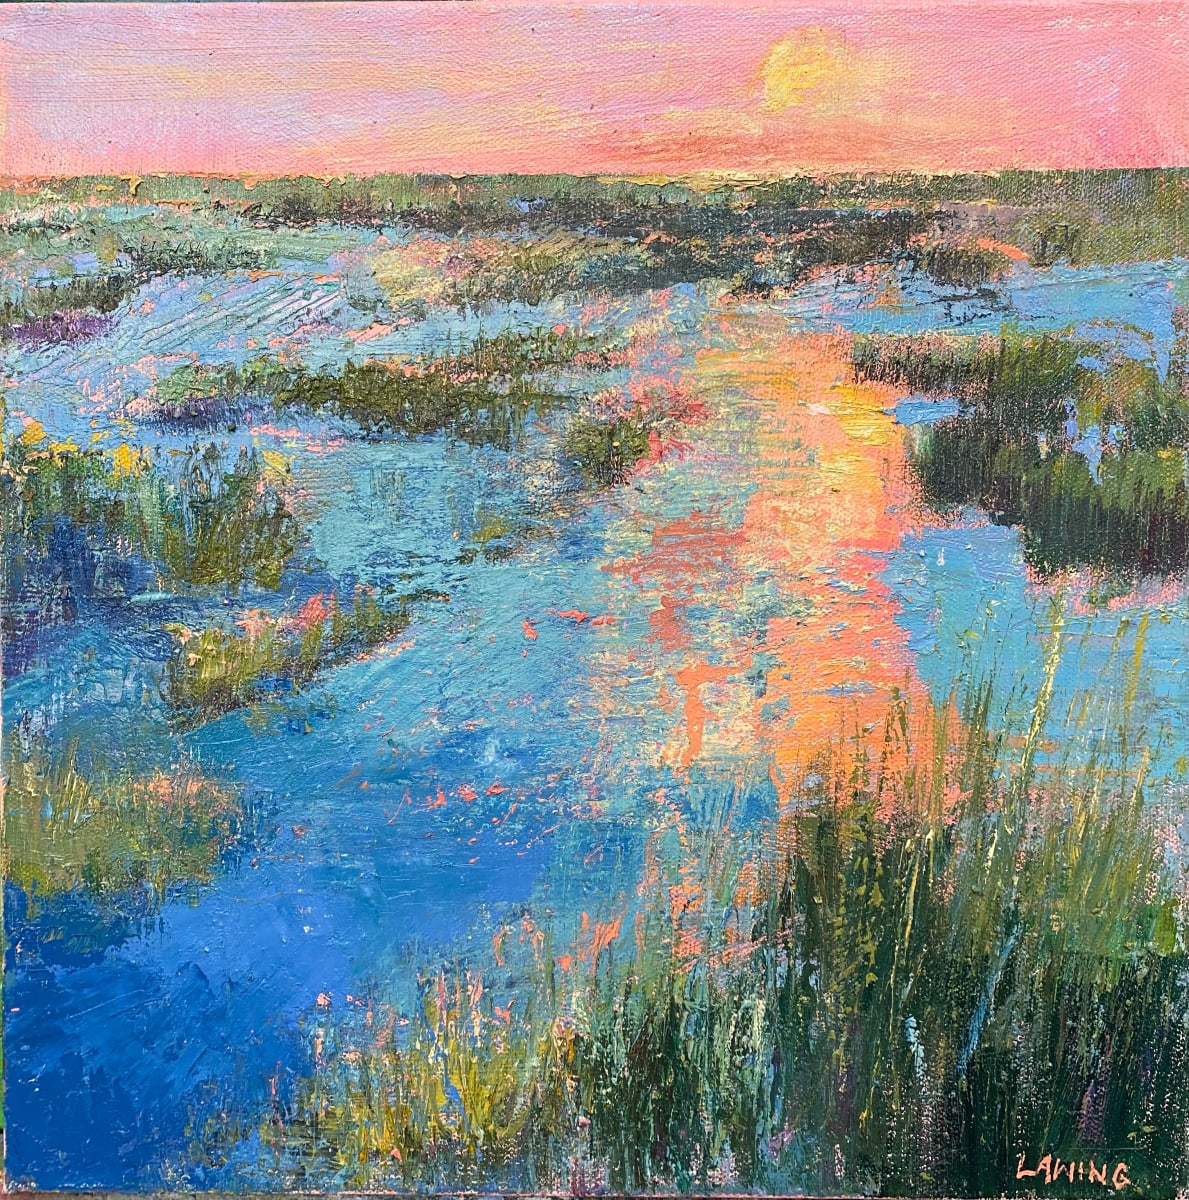 Summer Sun Over The Lowcountry by Julia Chandler Lawing 